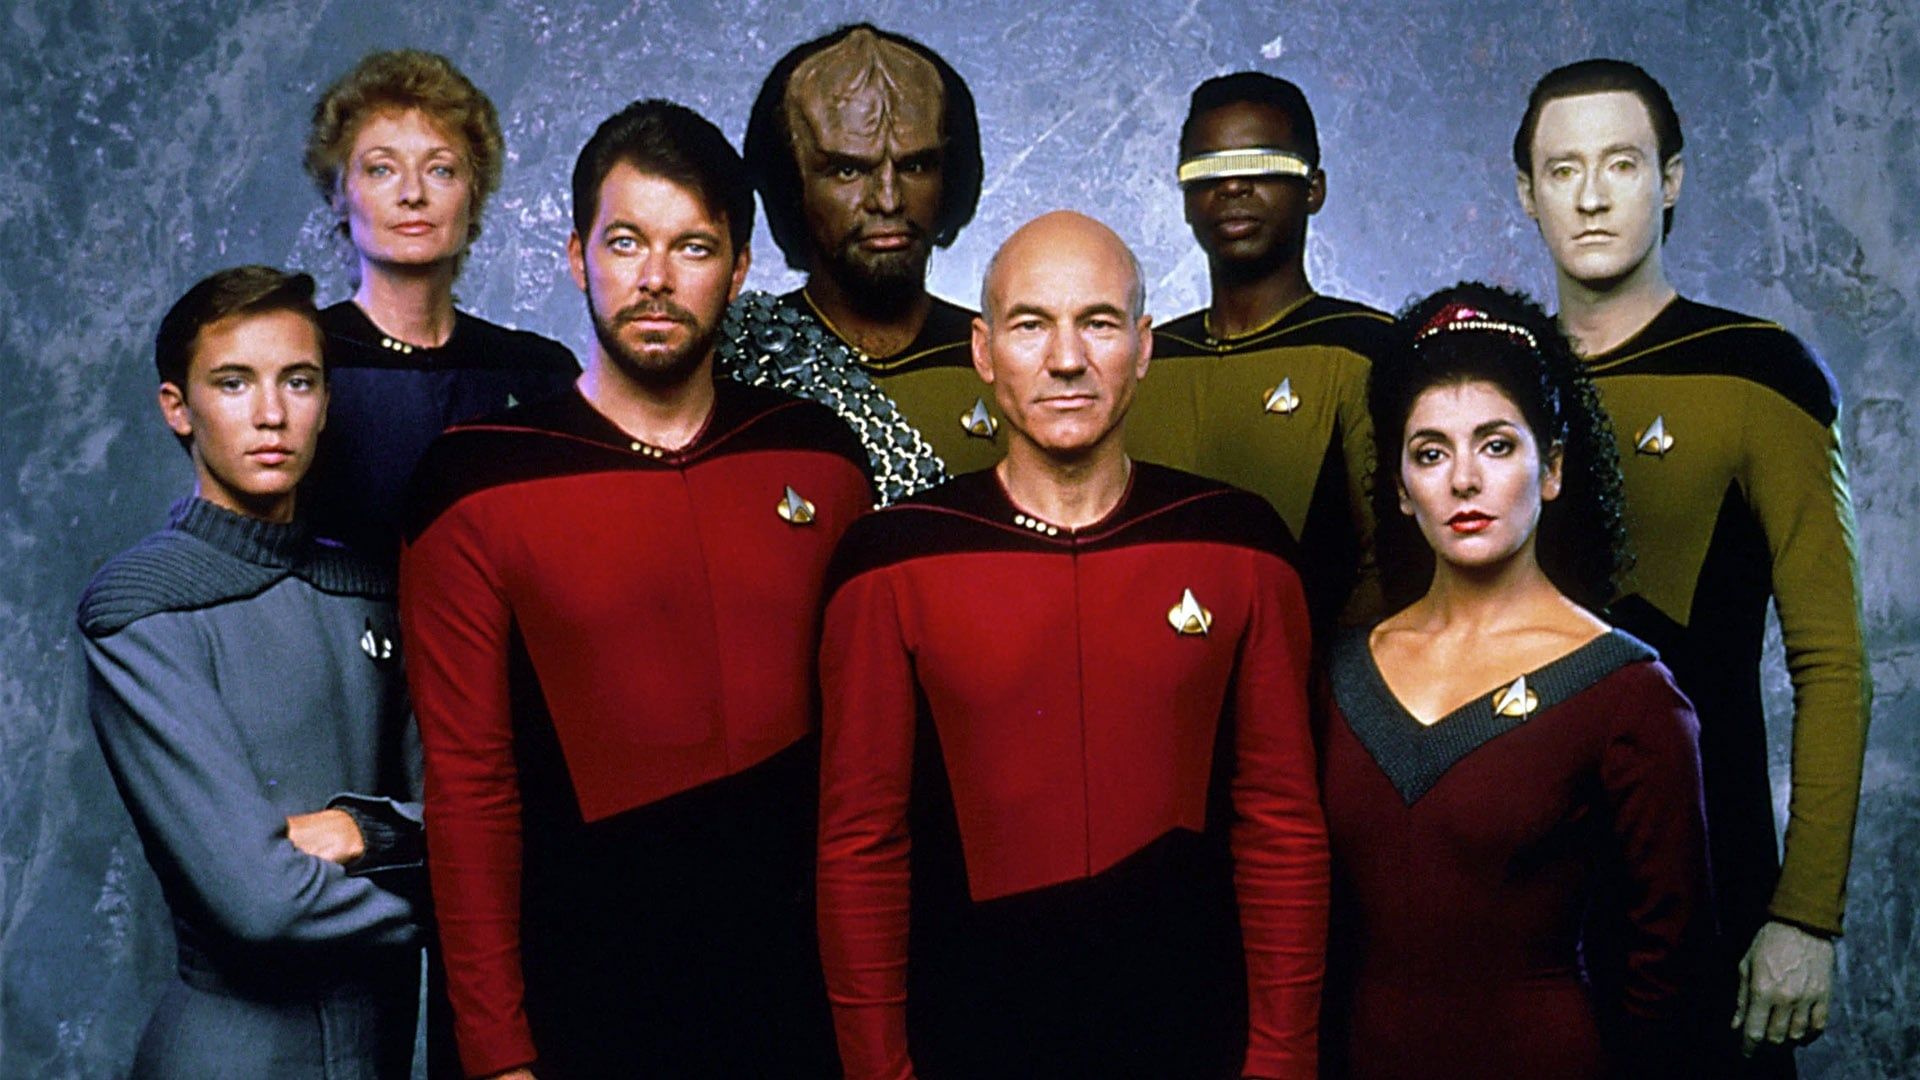 The Star Trek Saga: From One Generation to the Next background